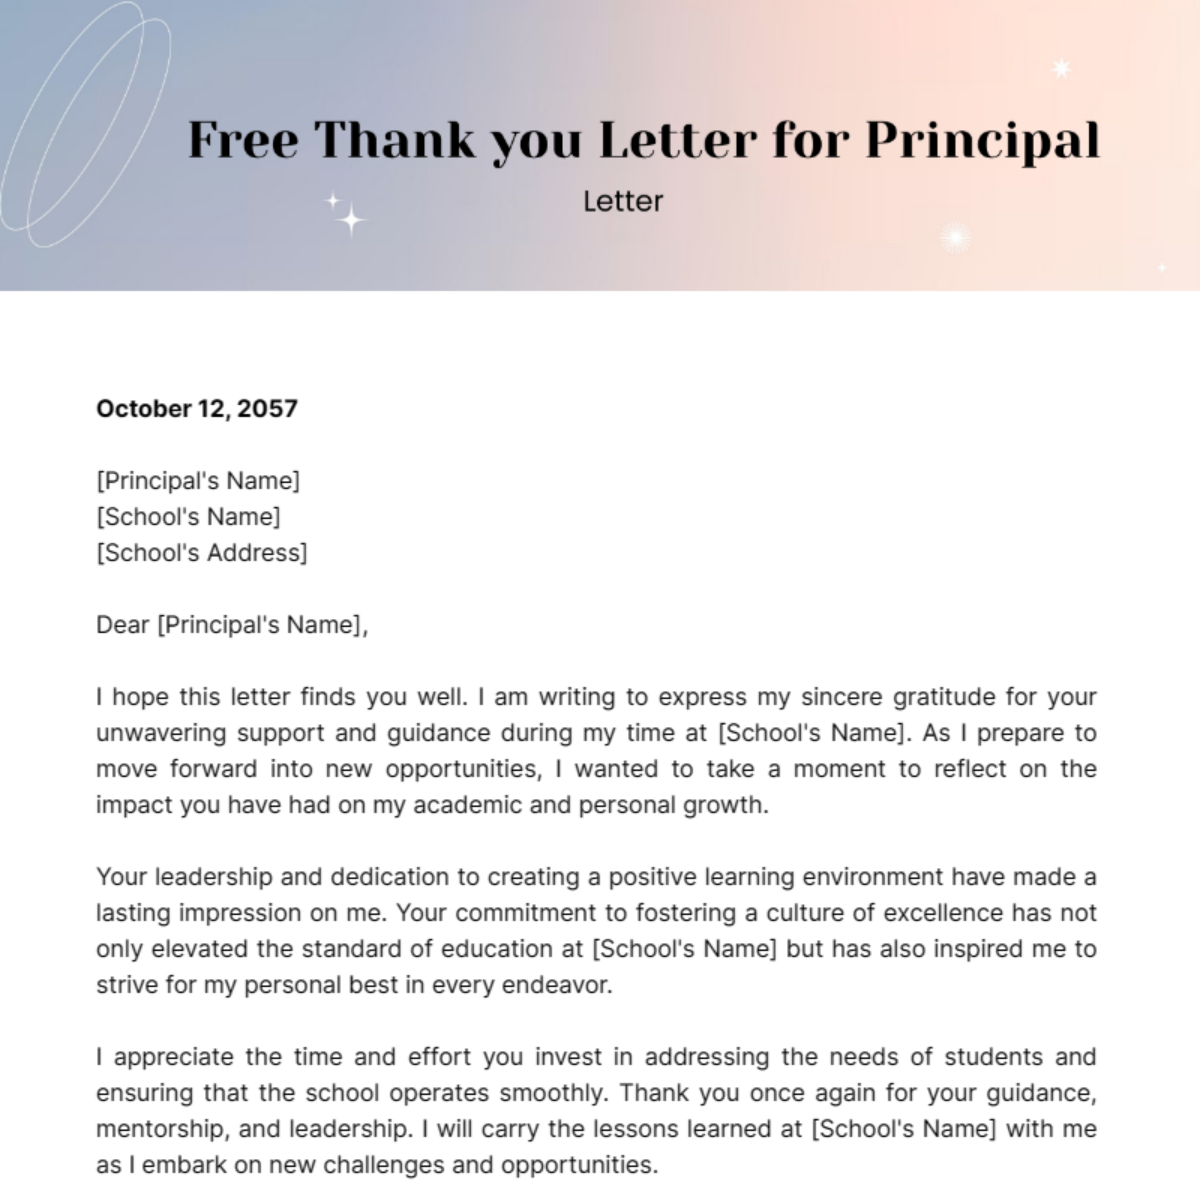 Thank you Letter for Principal Template